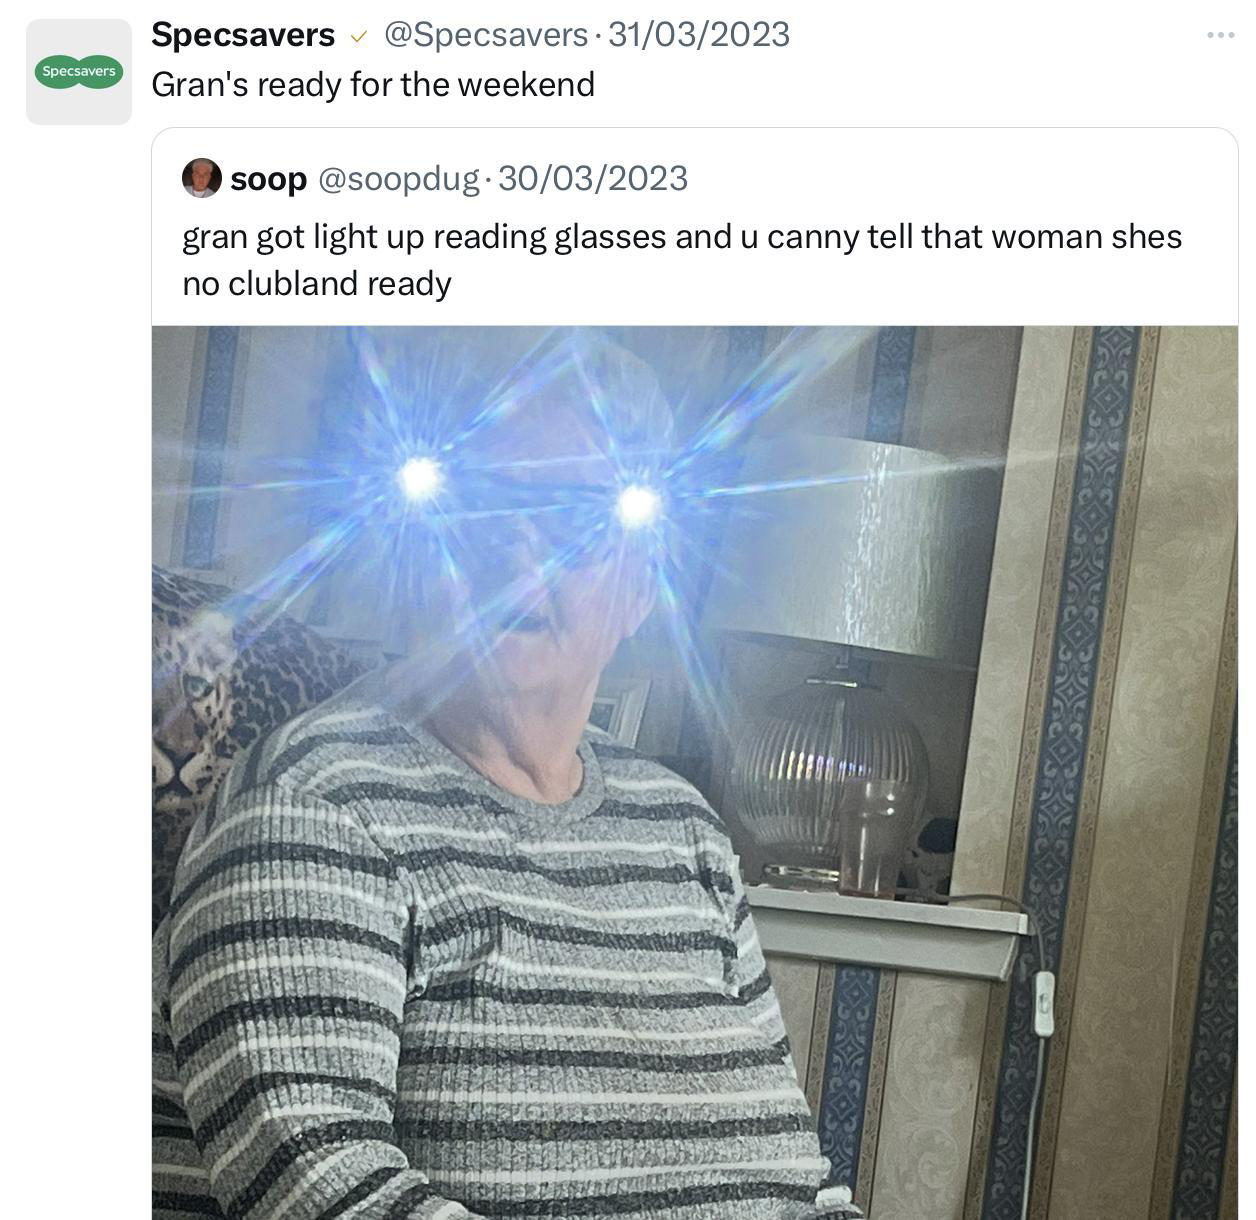 Shows a funny Tweet from Specsavers